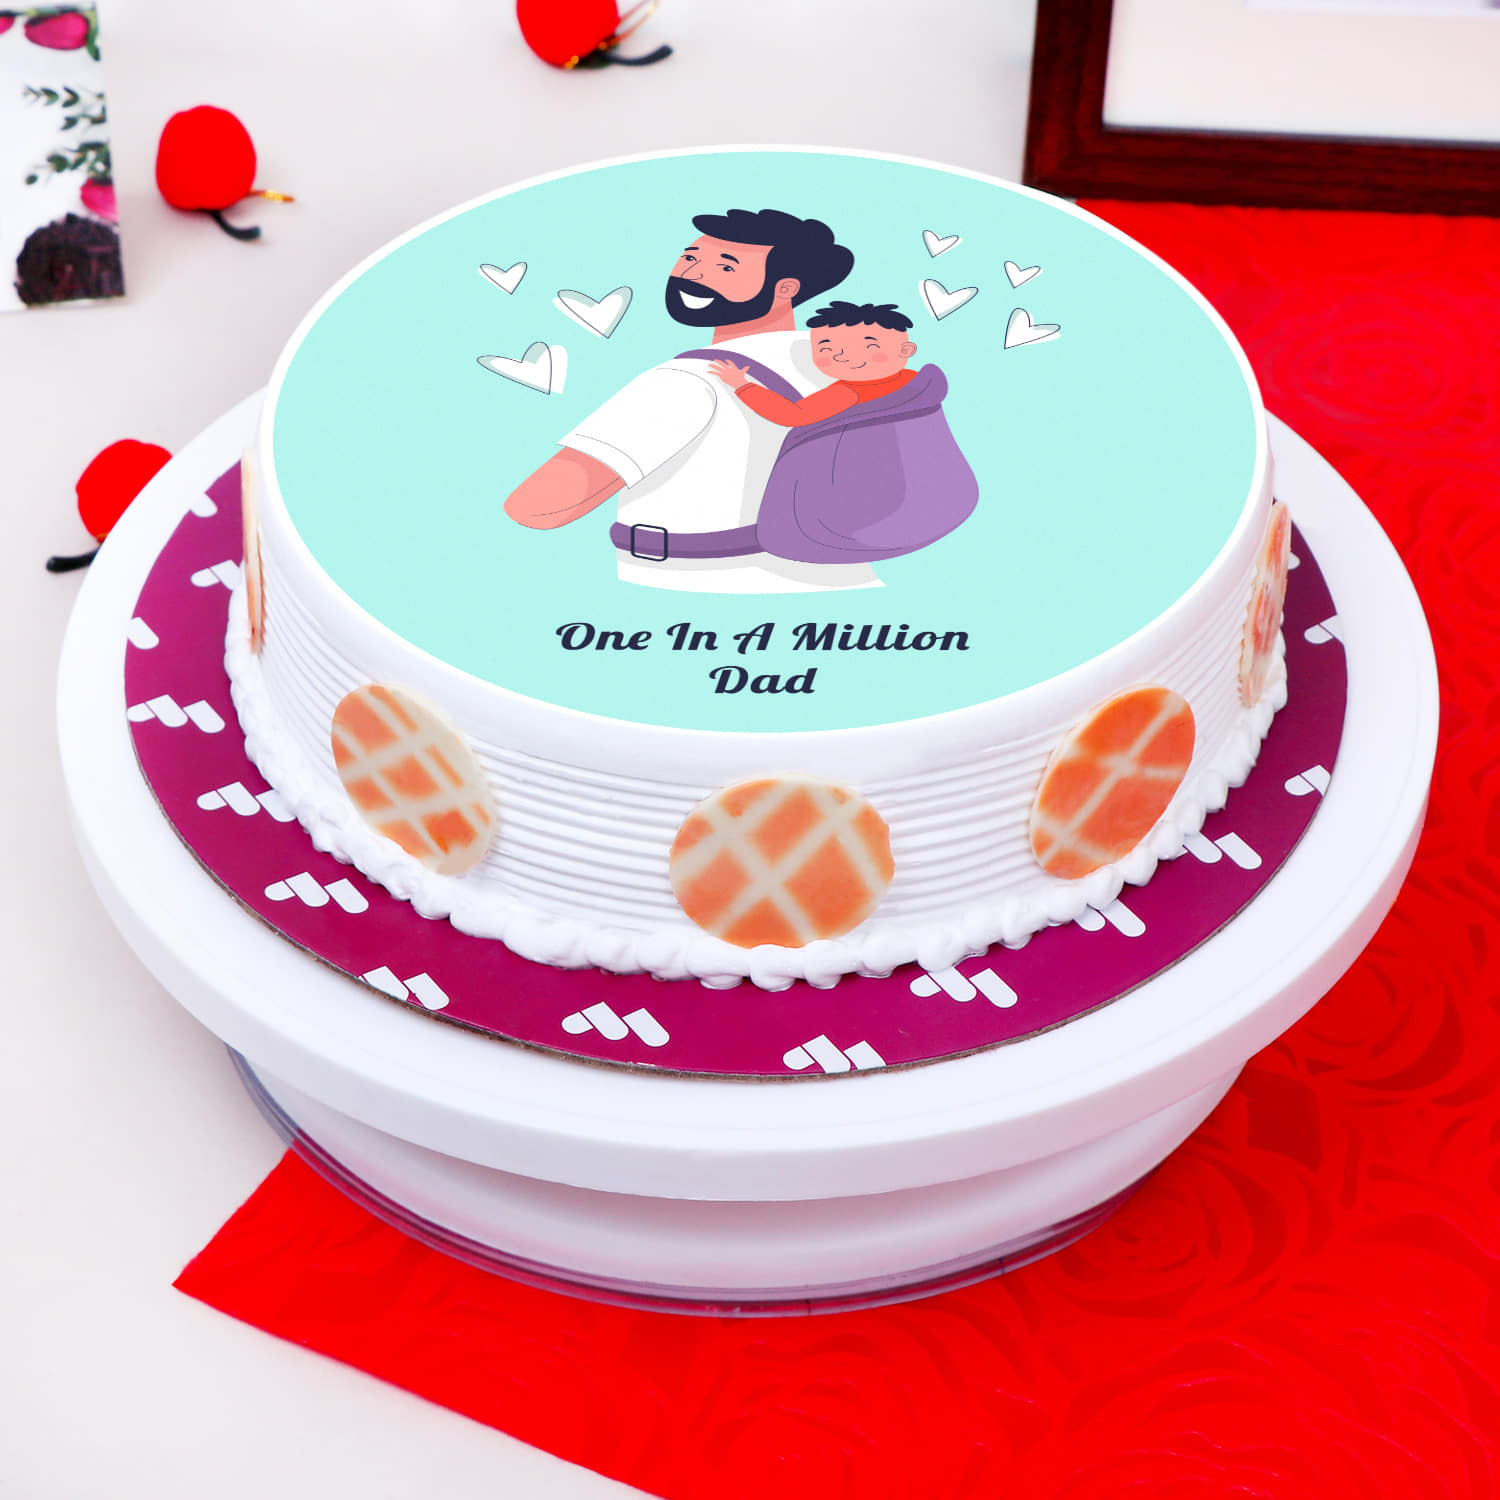 Celebrate Dad with a Deliciously Memorable Dad Cake